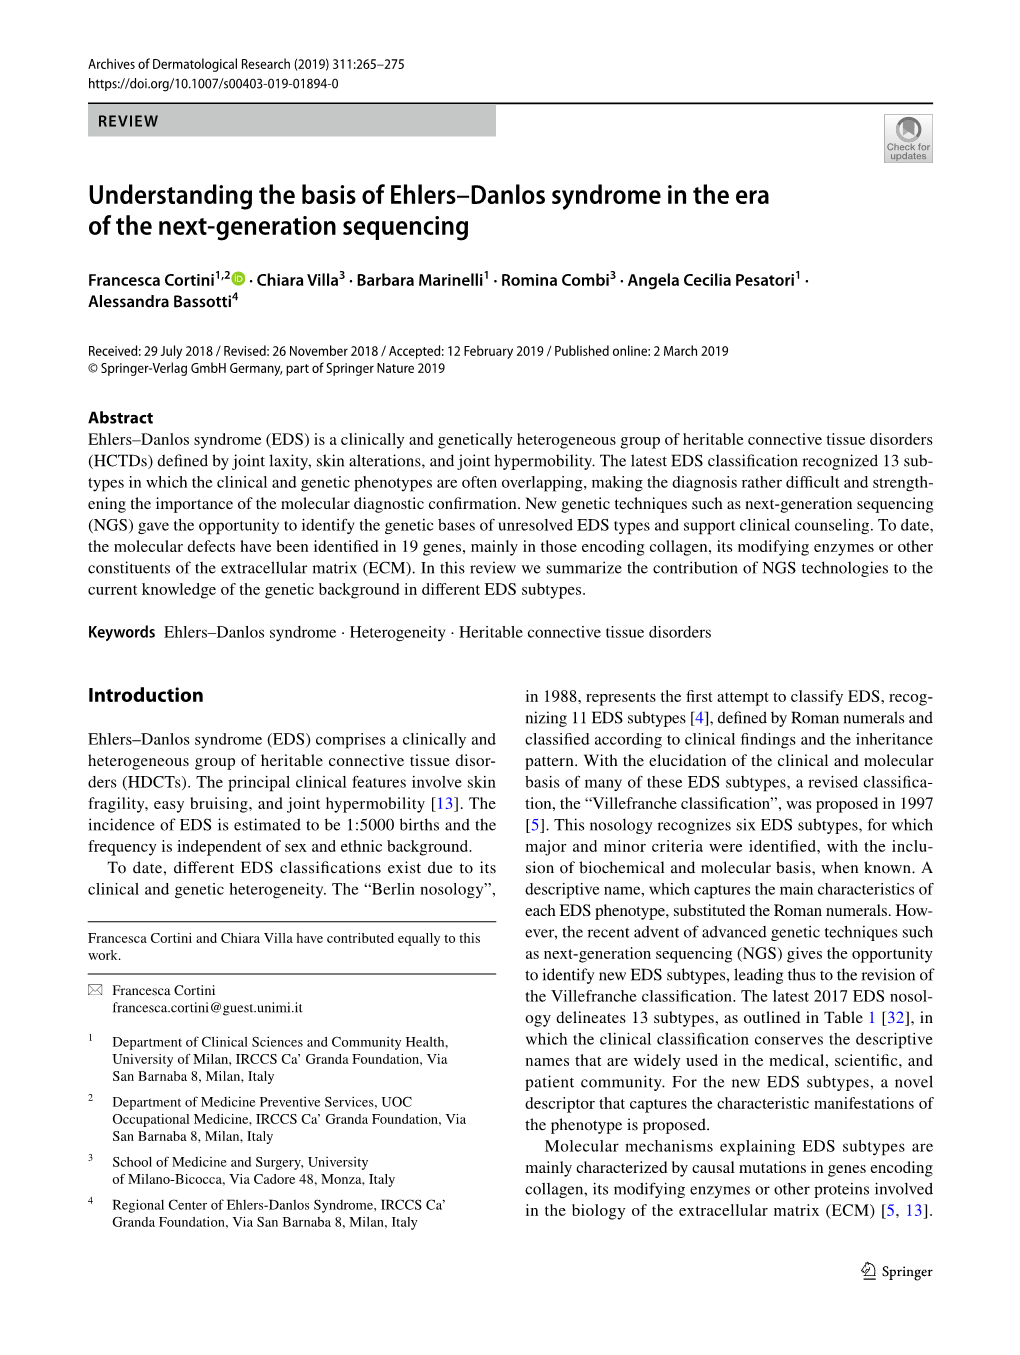 Understanding the Basis of Ehlers–Danlos Syndrome in the Era of the Next-Generation Sequencing